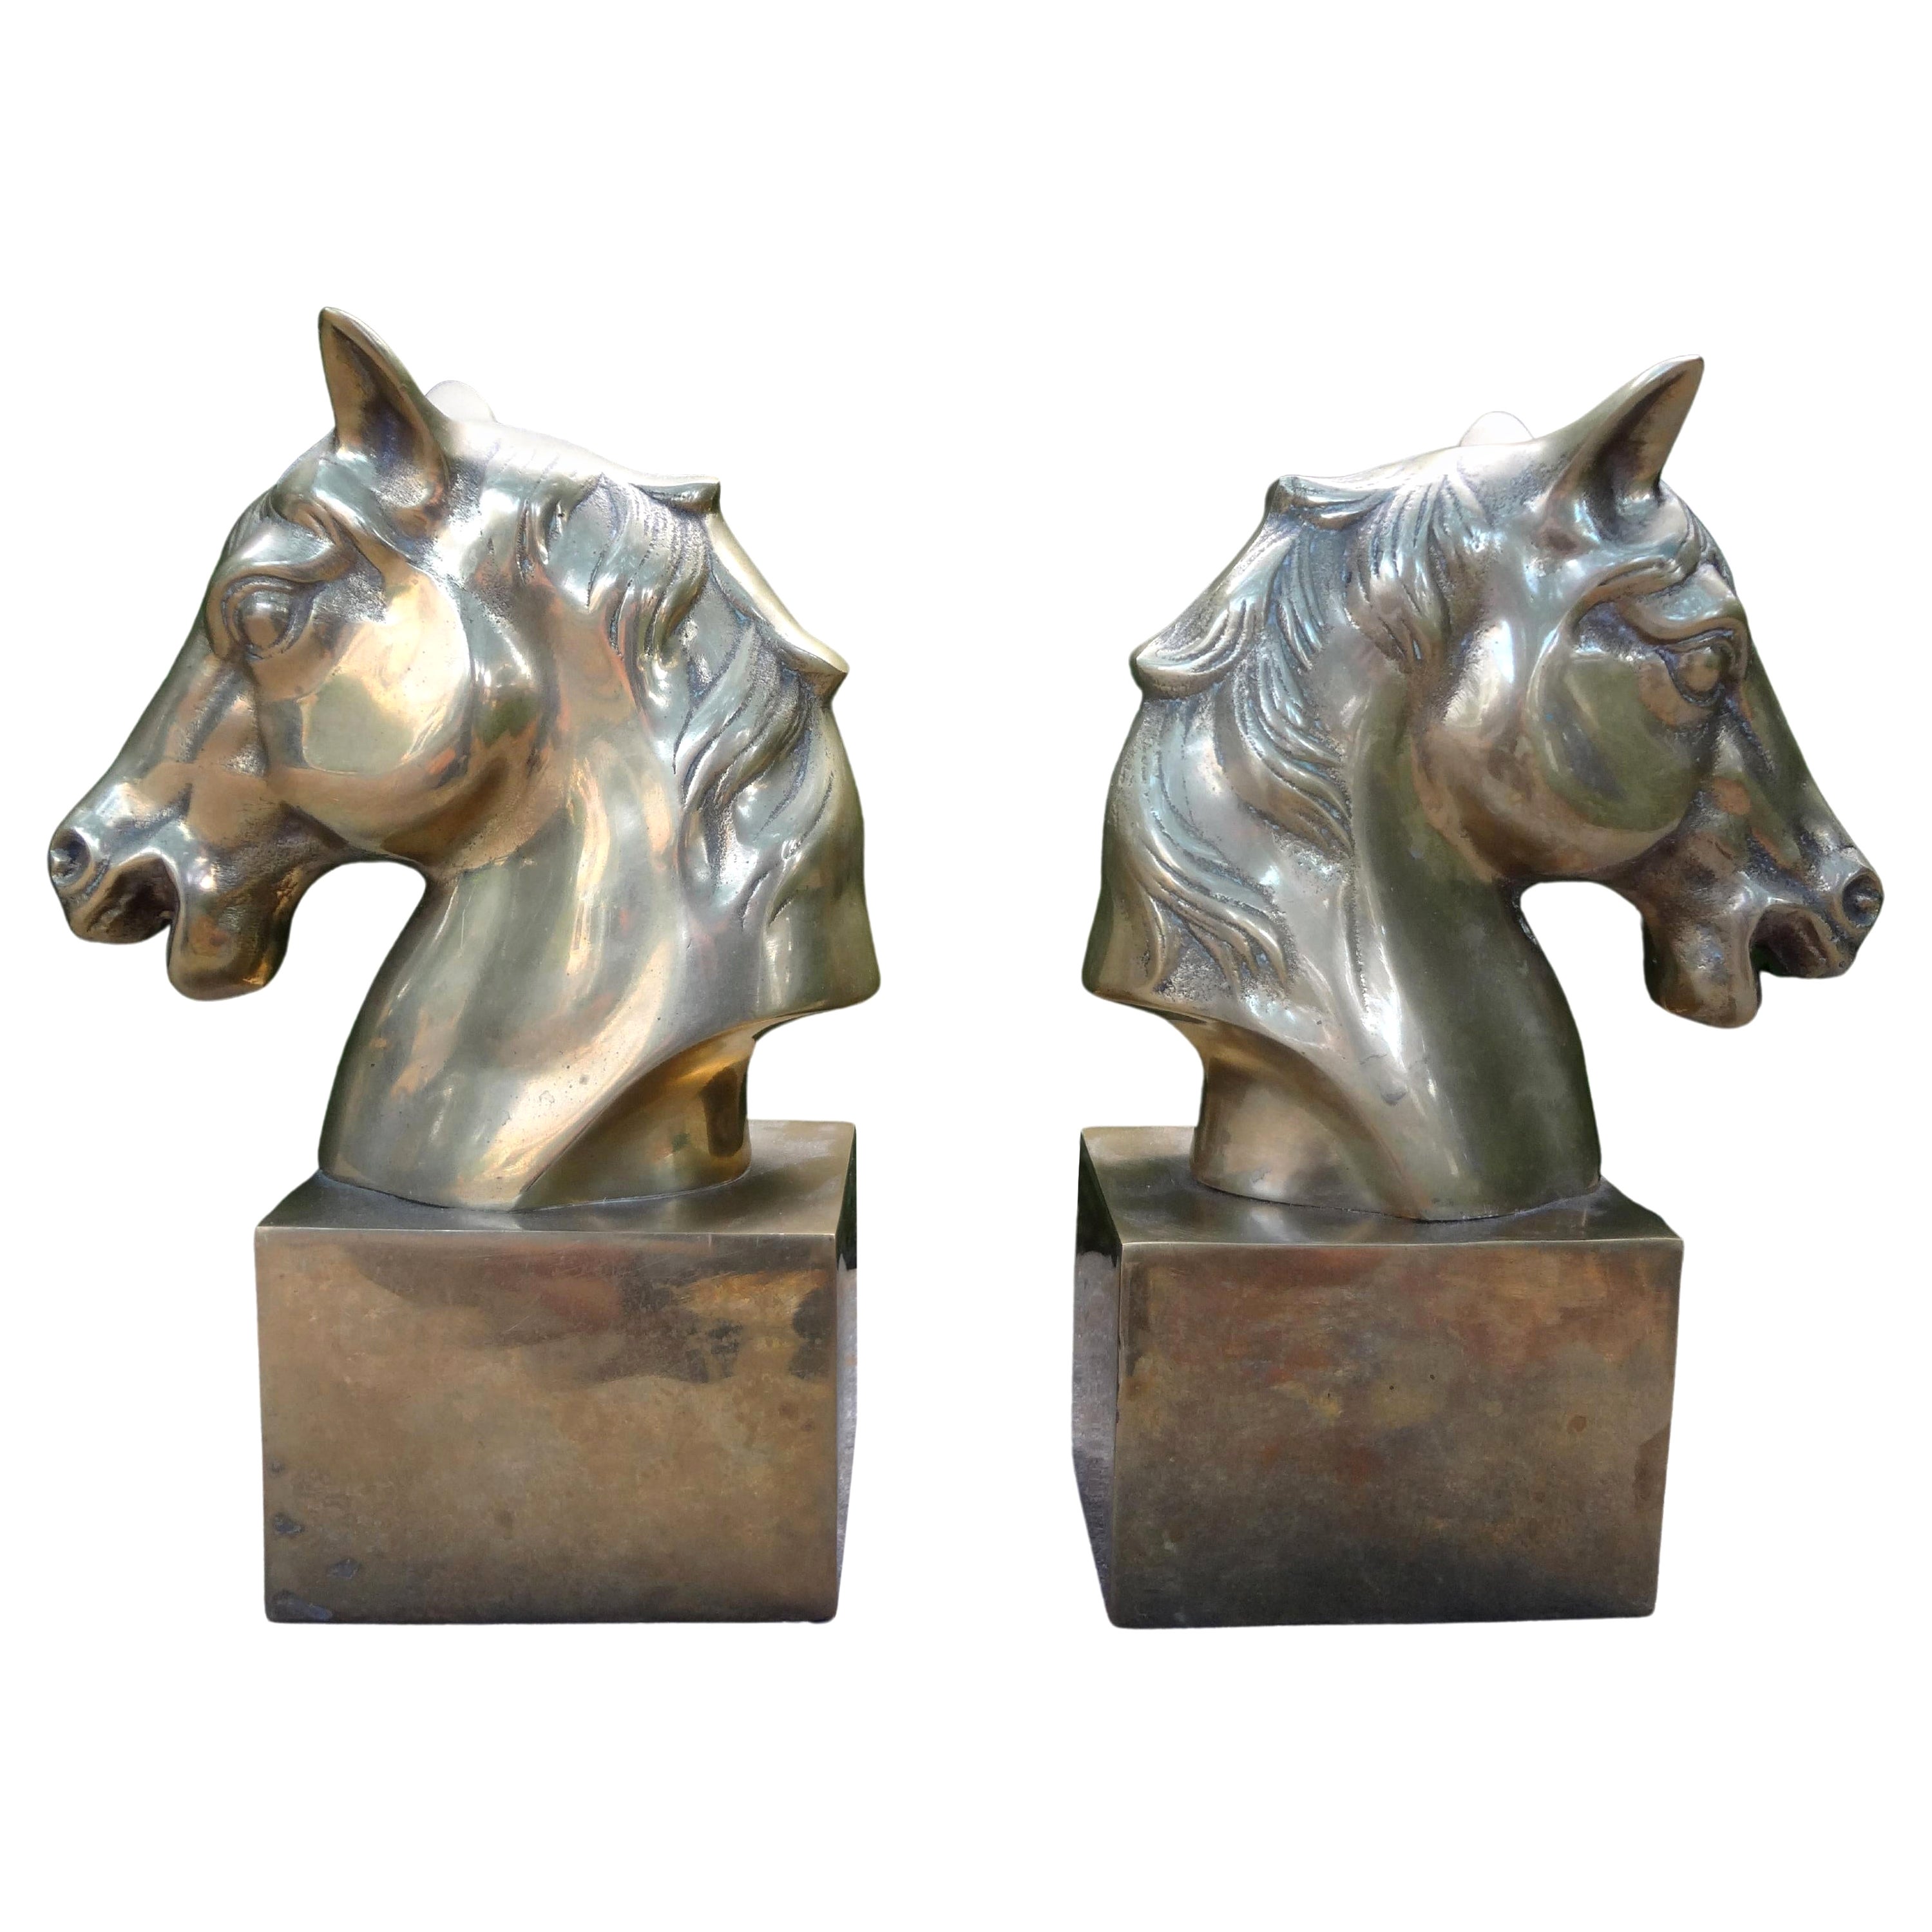 Pair of Vintage Brass Horse Head Bookends